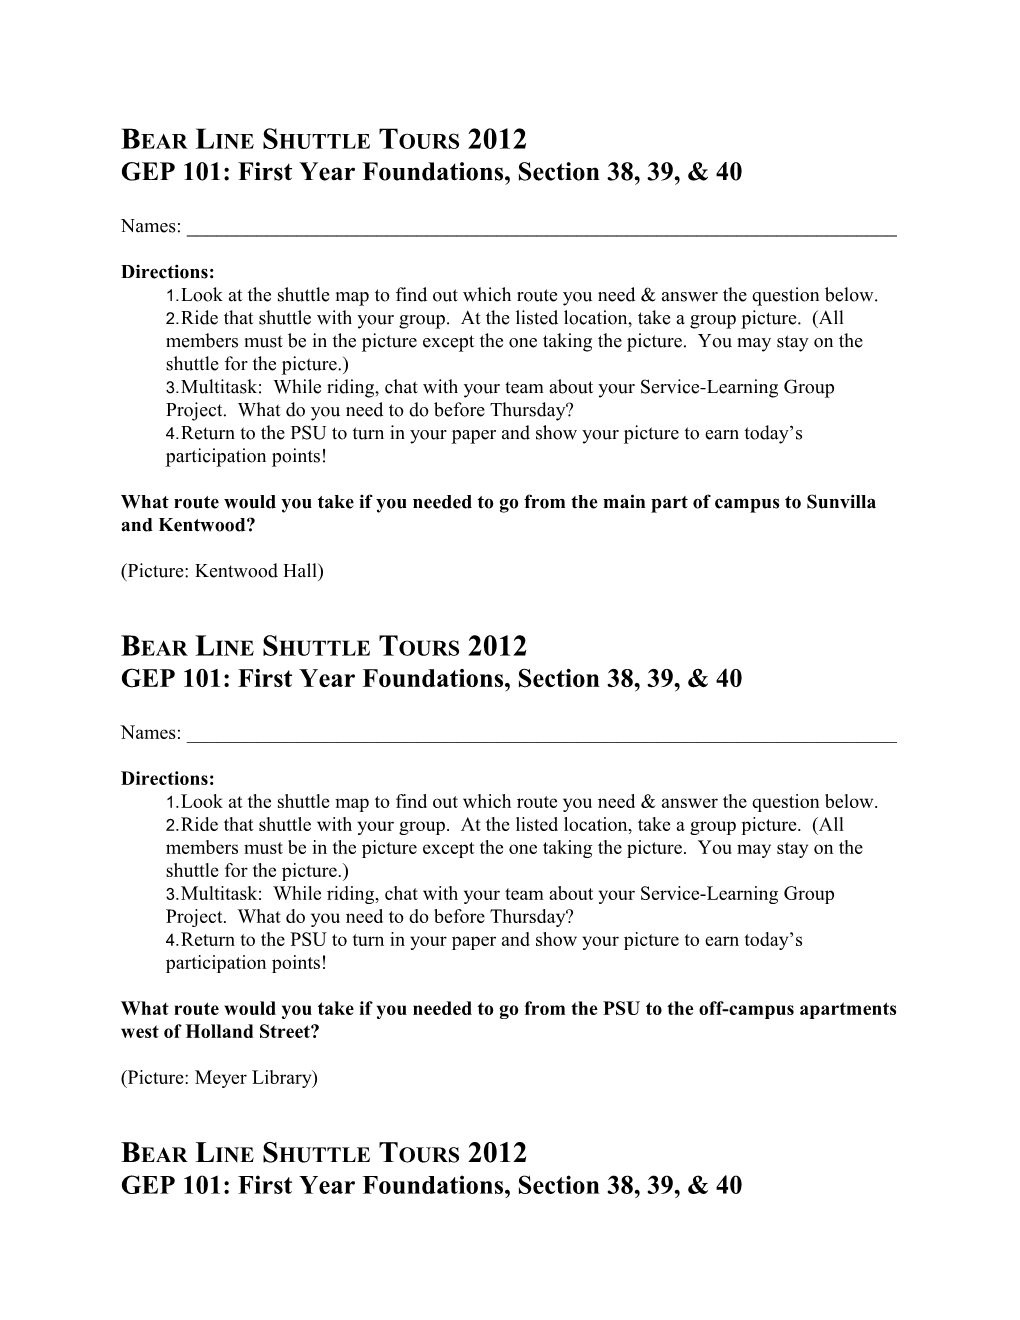 GEP 101: First Year Foundations, Section 38, 39, & 40